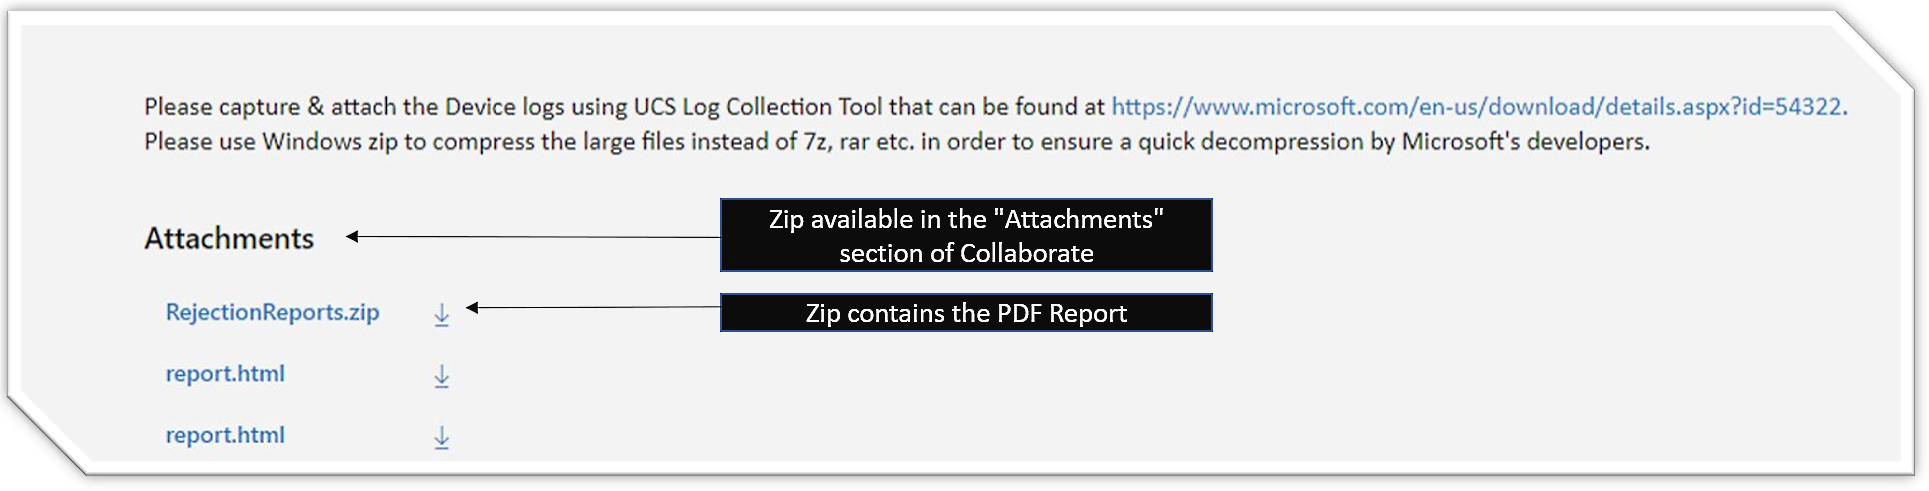 Screenshot of bug attachment with the RejectionReports.zip file attached that contains the ReliabilityMeasureReport.pdf